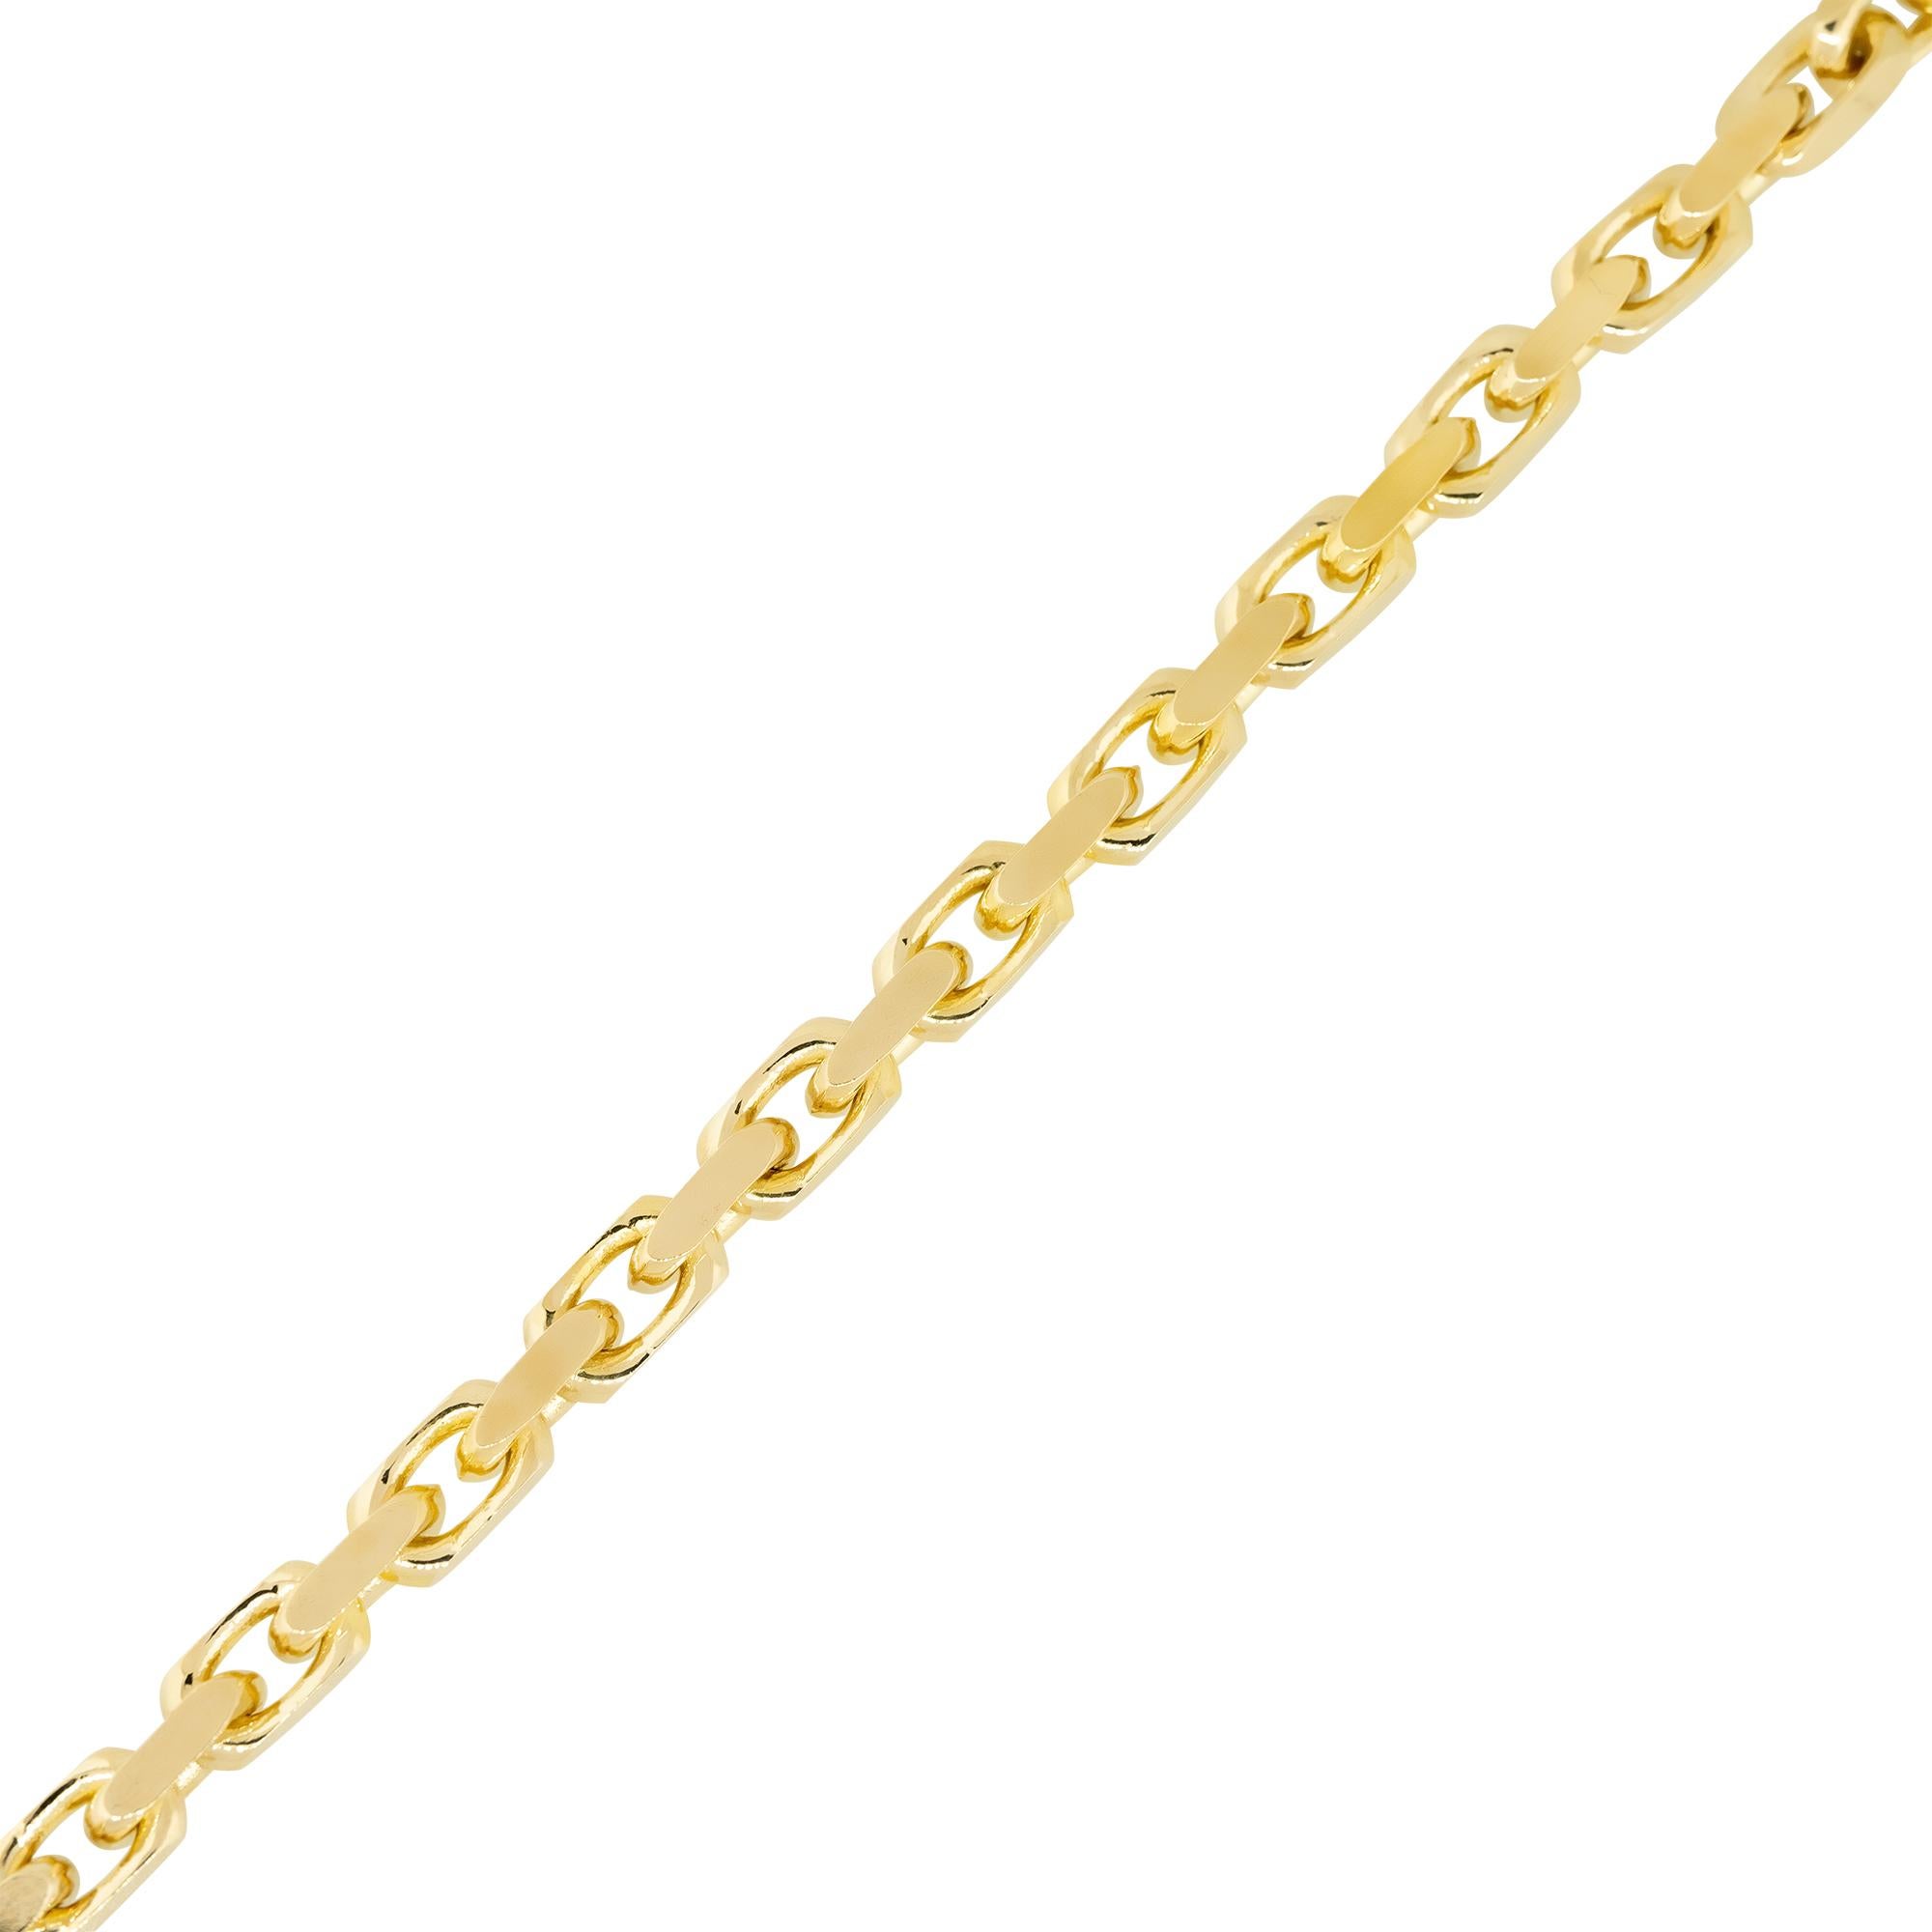 14k Yellow Gold 4.6mm High Polished Link Bracelet
Style: High Polished Solid Gold Bracelet
Material: 14k Yellow Gold
Measurements: Bracelet measures approximately 7.5″ in length, and 4.67mm in width
Fastening: Lobster Claw Clasp
Item Weight: 20.0g